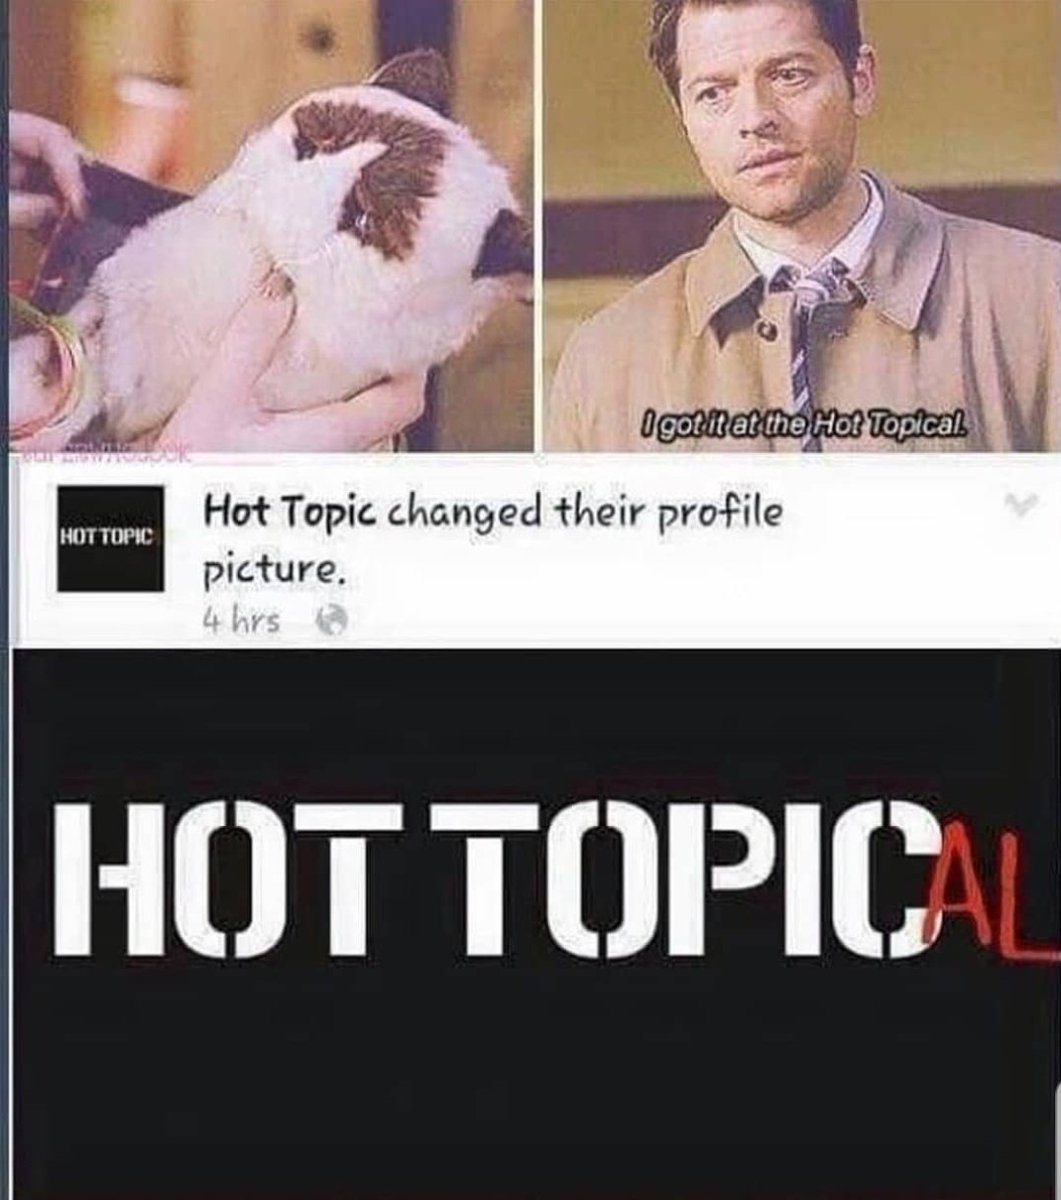 Hot topic changed their profile Pic #hottopic #mishacollins #mish #SPNFamil...